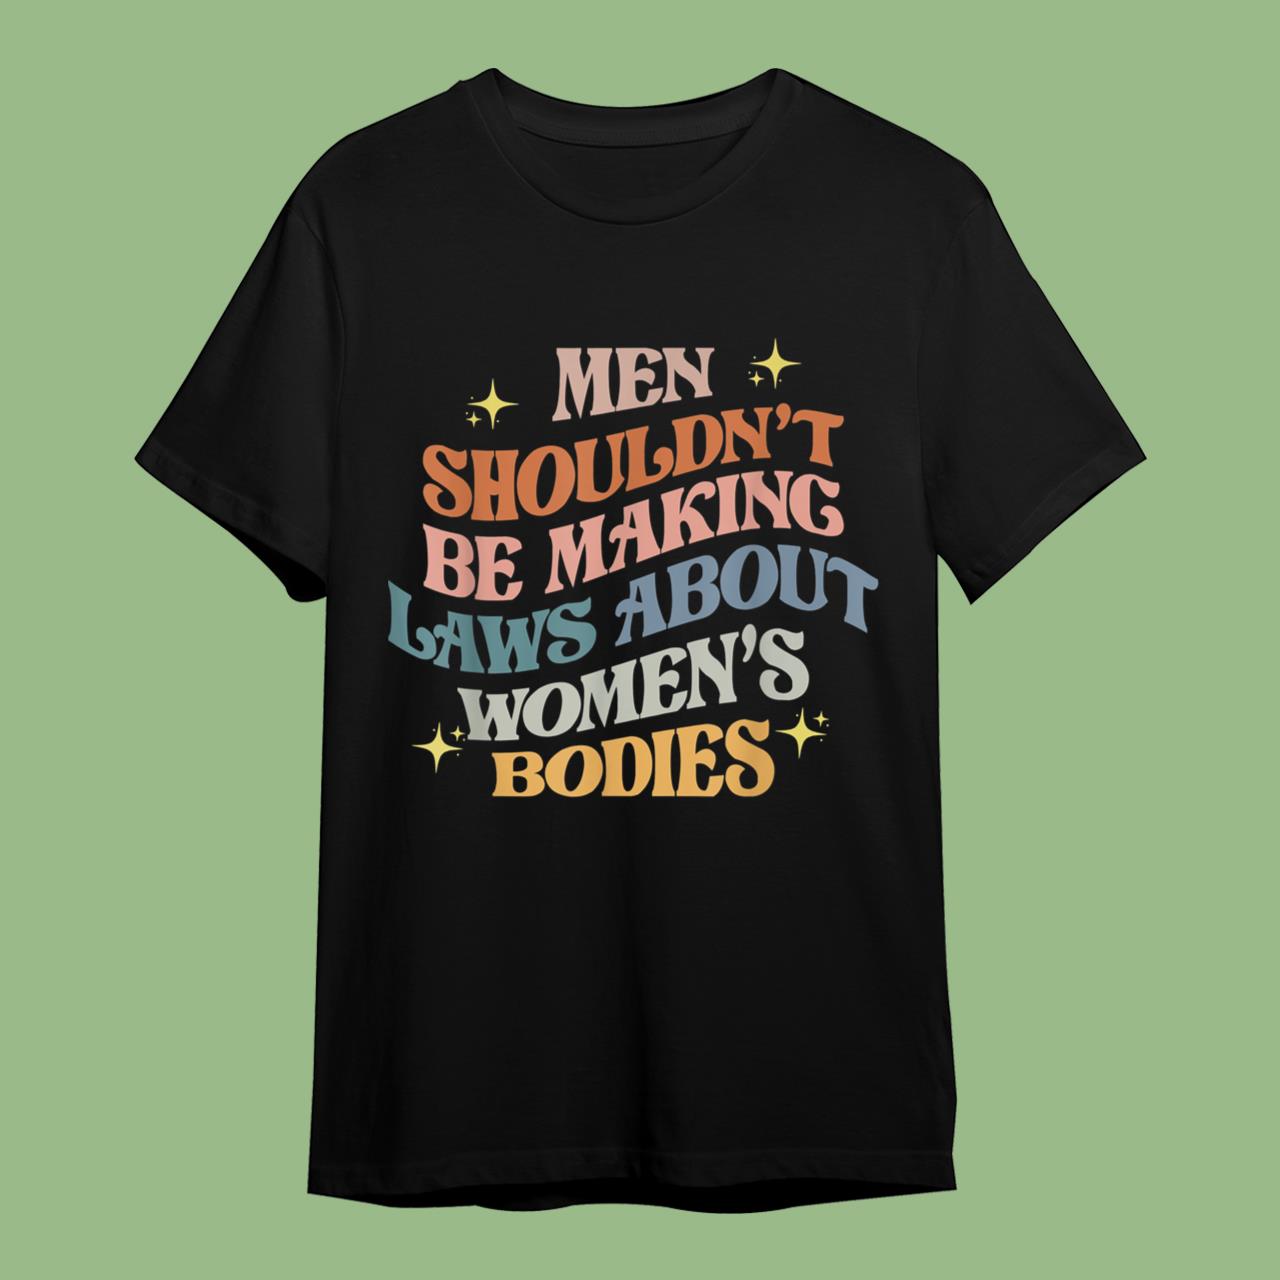 Men Shouldn't Be Making Laws About Bodies Feminist Women Rights T-Shirt